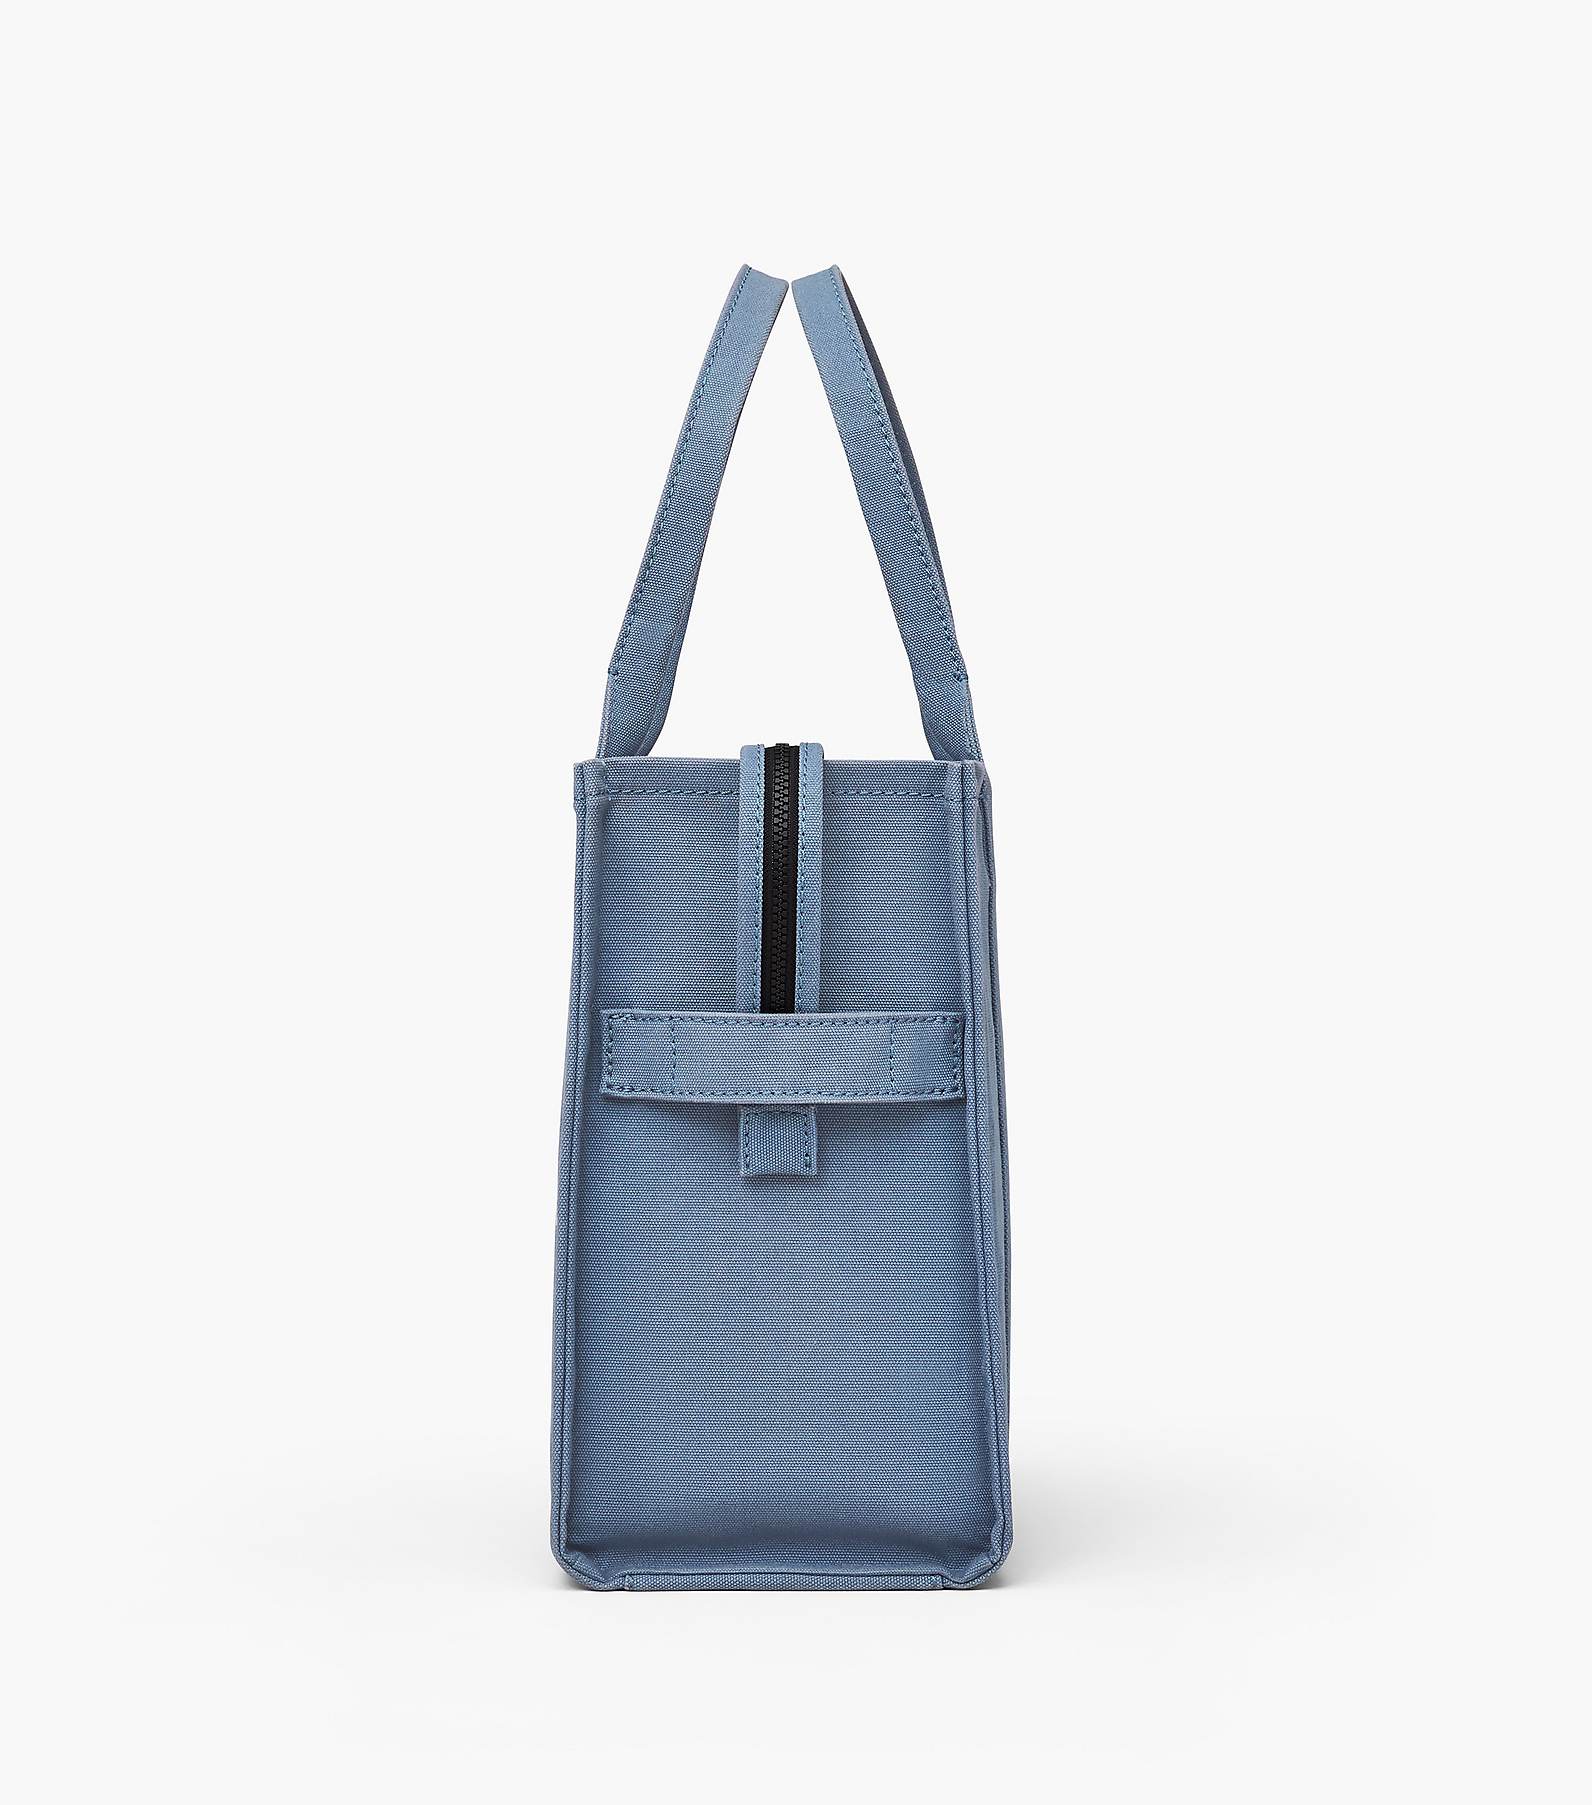 The Canvas Large Tote Bag, Marc Jacobs